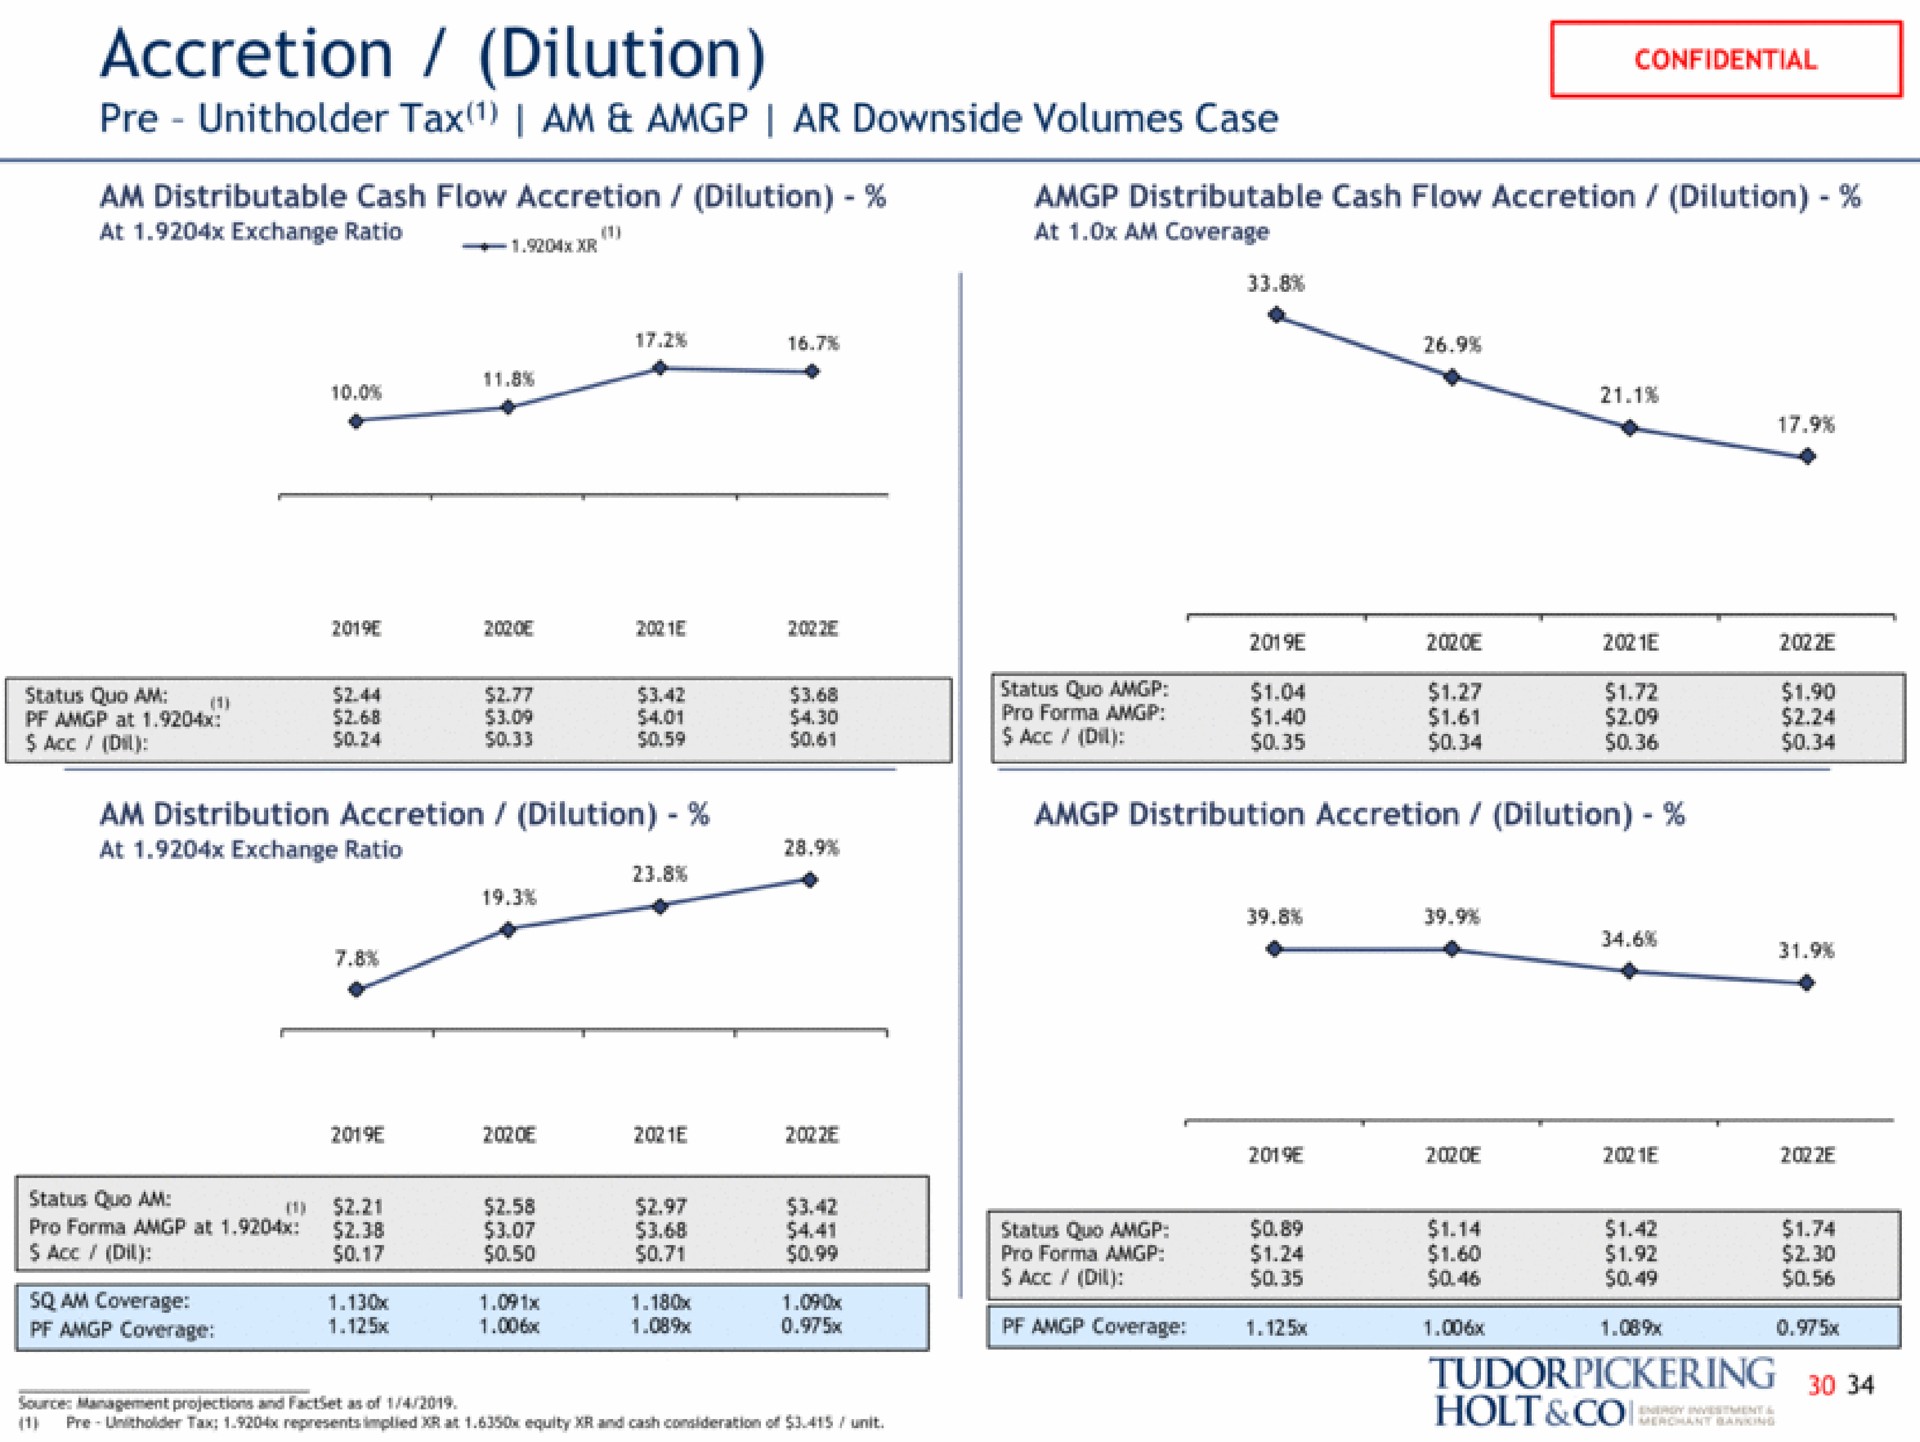 accretion dilution tax am downside volumes case | Tudor, Pickering, Holt & Co